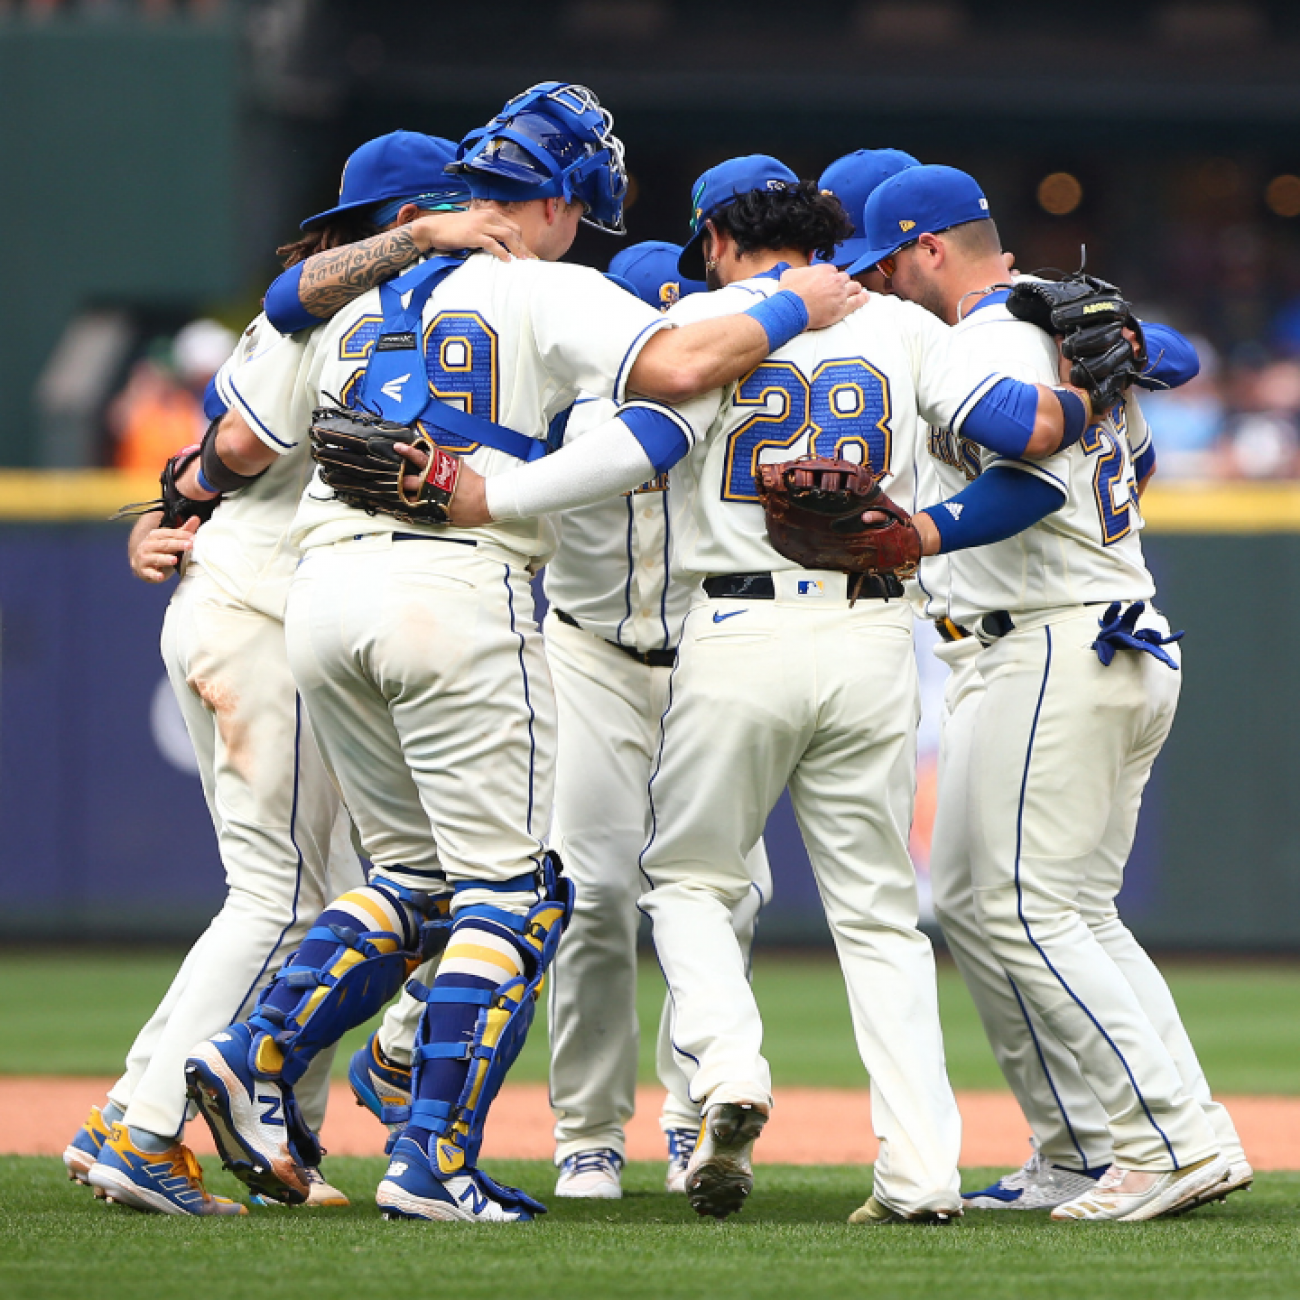 Seattle Mariners infielders hug and dance as they celebrate beating the San Diego Padres 6-1, at T-Mobile Park, in Seattle, Washington, on September 14, 2022.